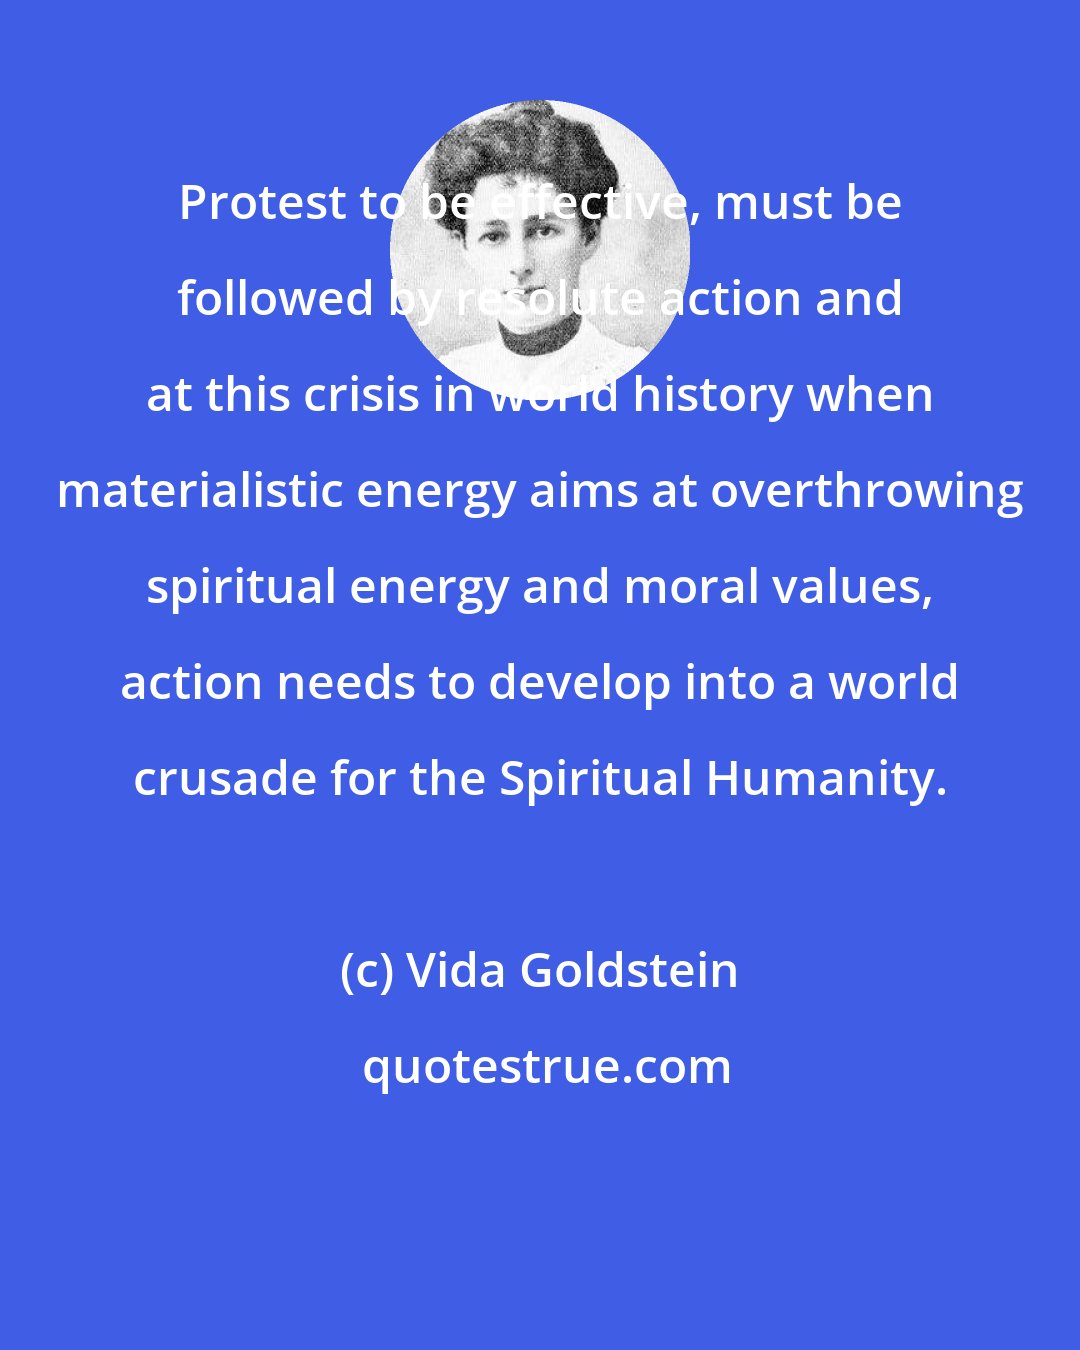 Vida Goldstein: Protest to be effective, must be followed by resolute action and at this crisis in world history when materialistic energy aims at overthrowing spiritual energy and moral values, action needs to develop into a world crusade for the Spiritual Humanity.